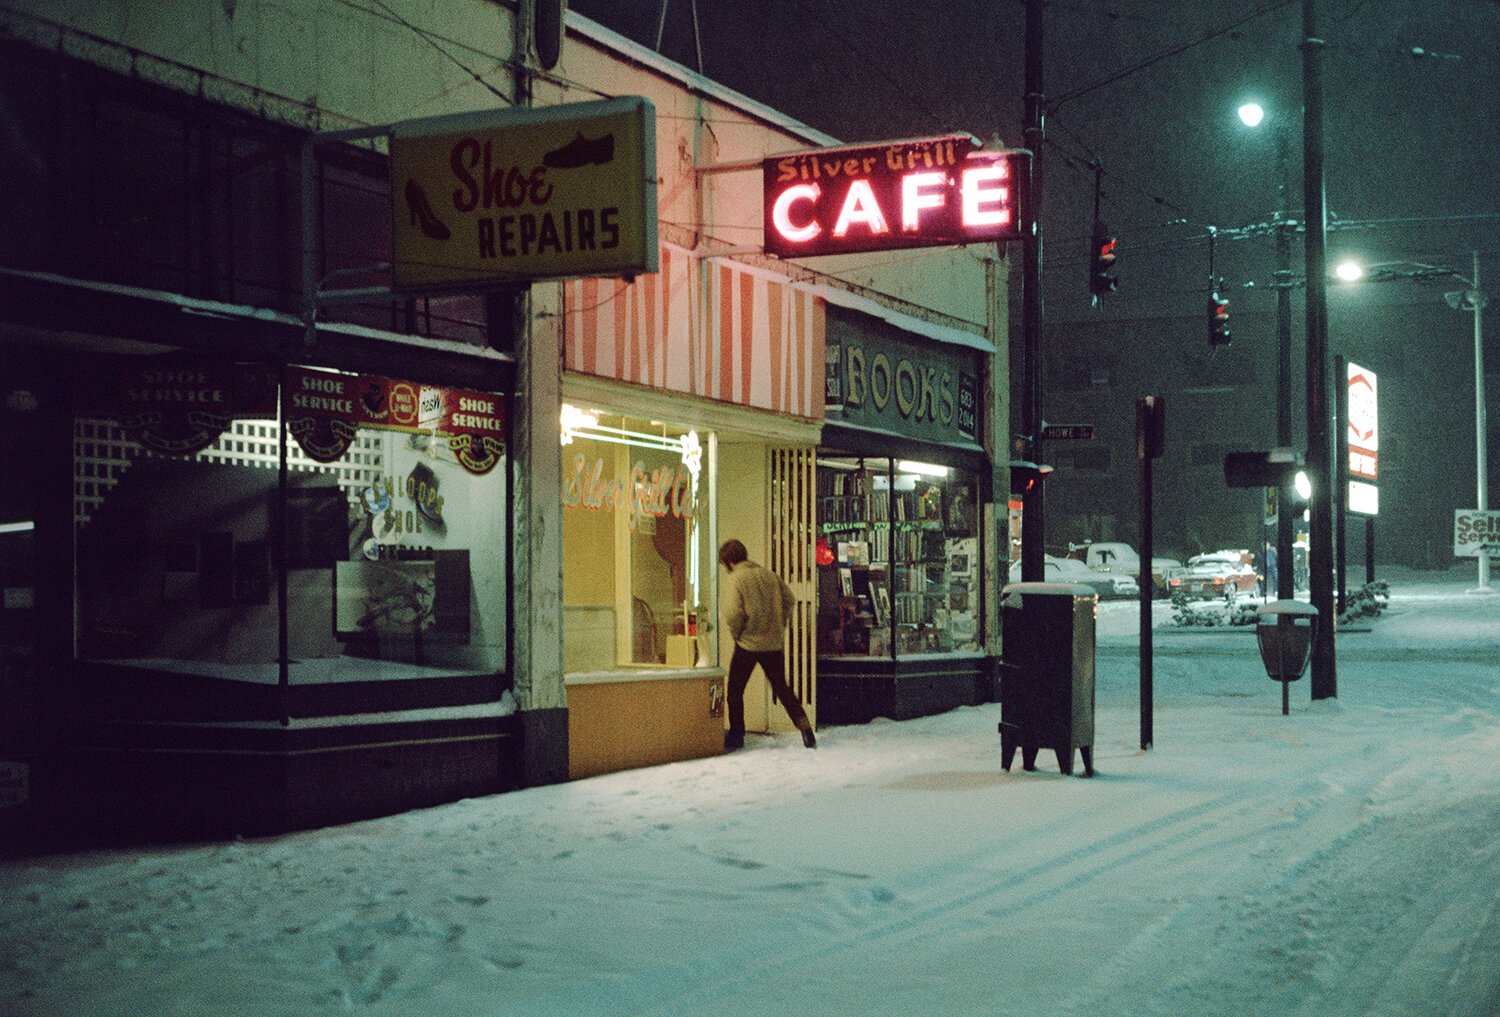 “Silver Grill Cafe, 1975.” From he Series “Under Vancouver 1972-1982” by Greg Girard | Canon T-90, Kodak Ektachrome Film